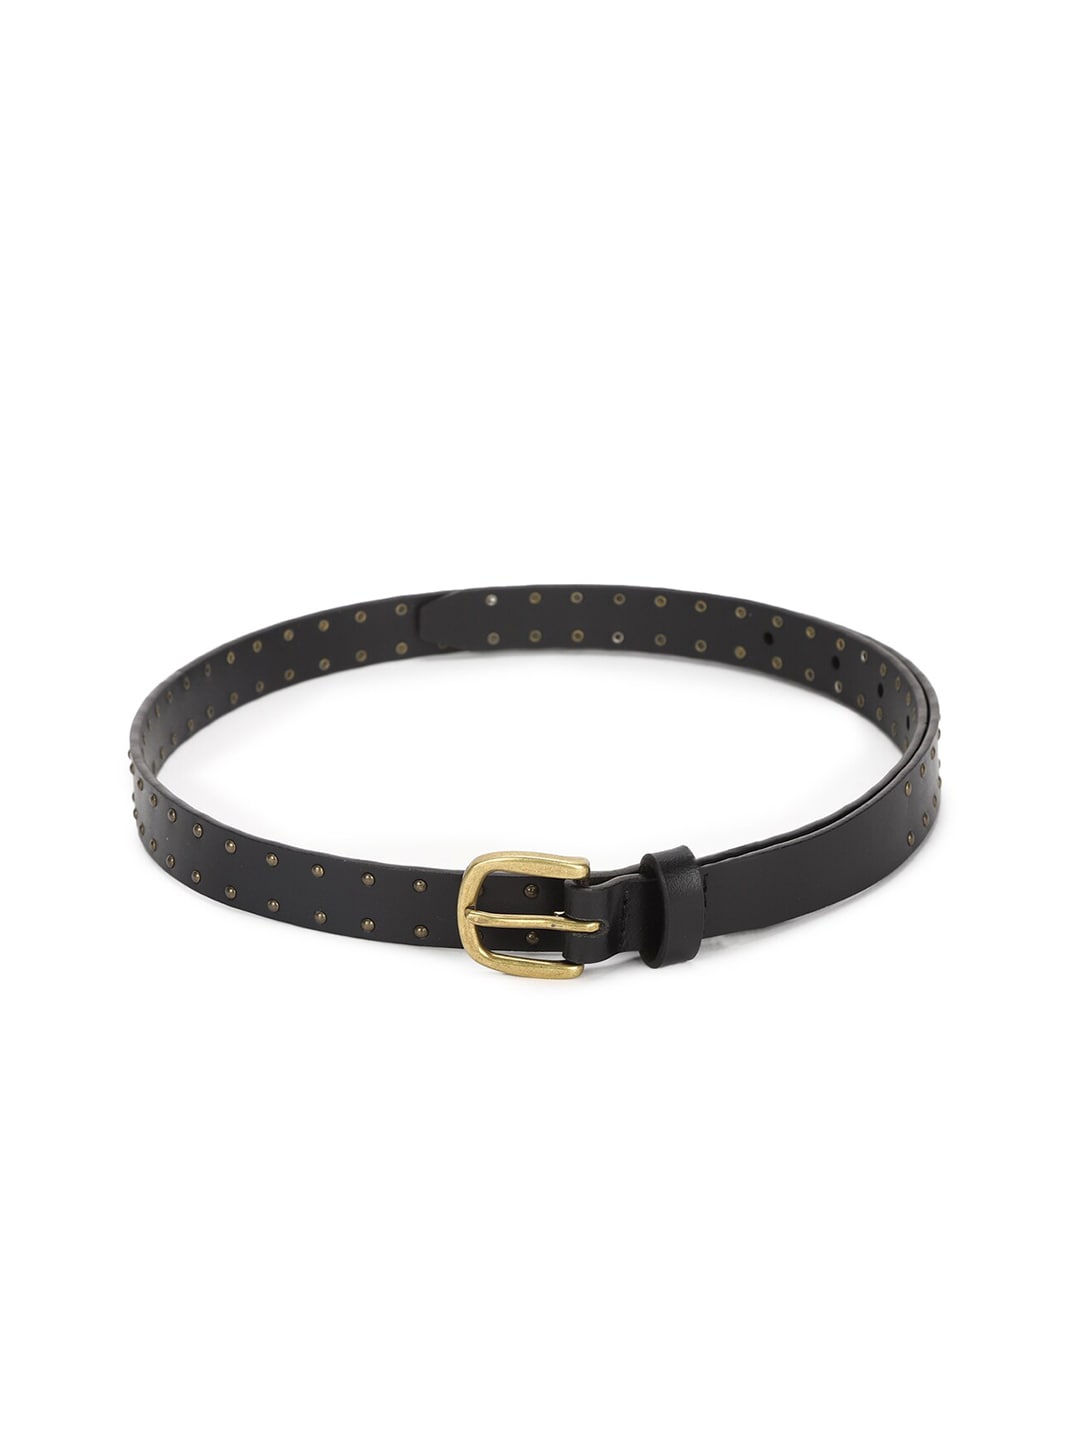 AMERICAN EAGLE OUTFITTERS Women Black & Gold-Toned Textured Leather Slim Belt Price in India